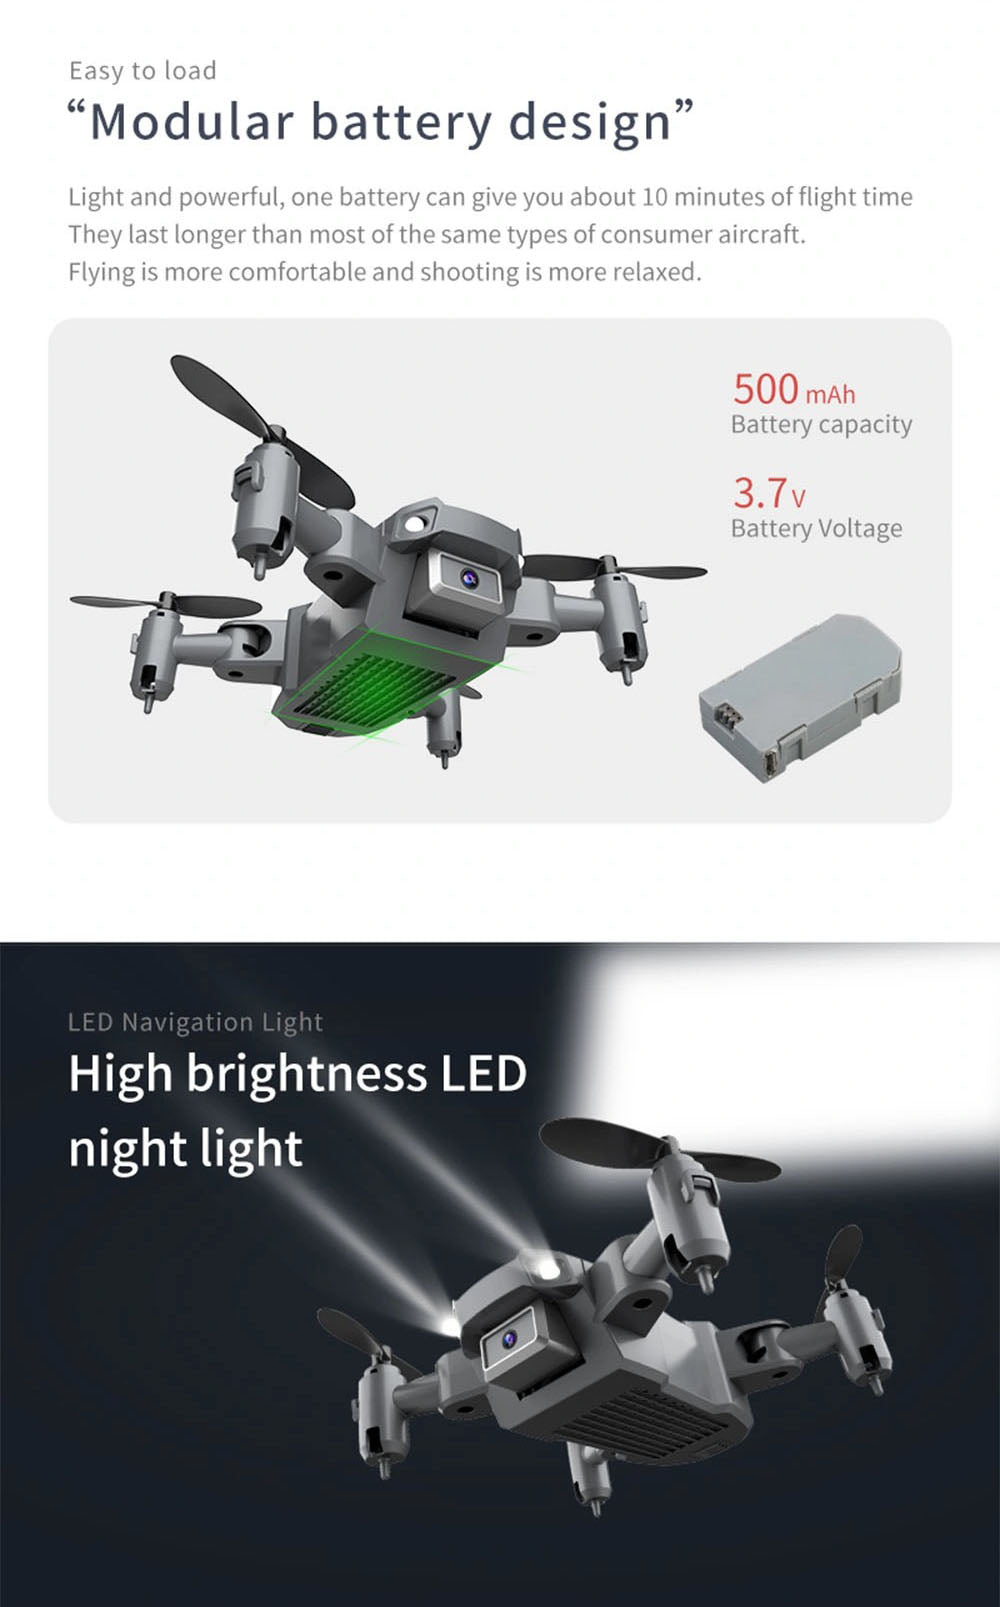 KY905 Mini Drone, one battery can give you about 10 minutes of flight time last longer than